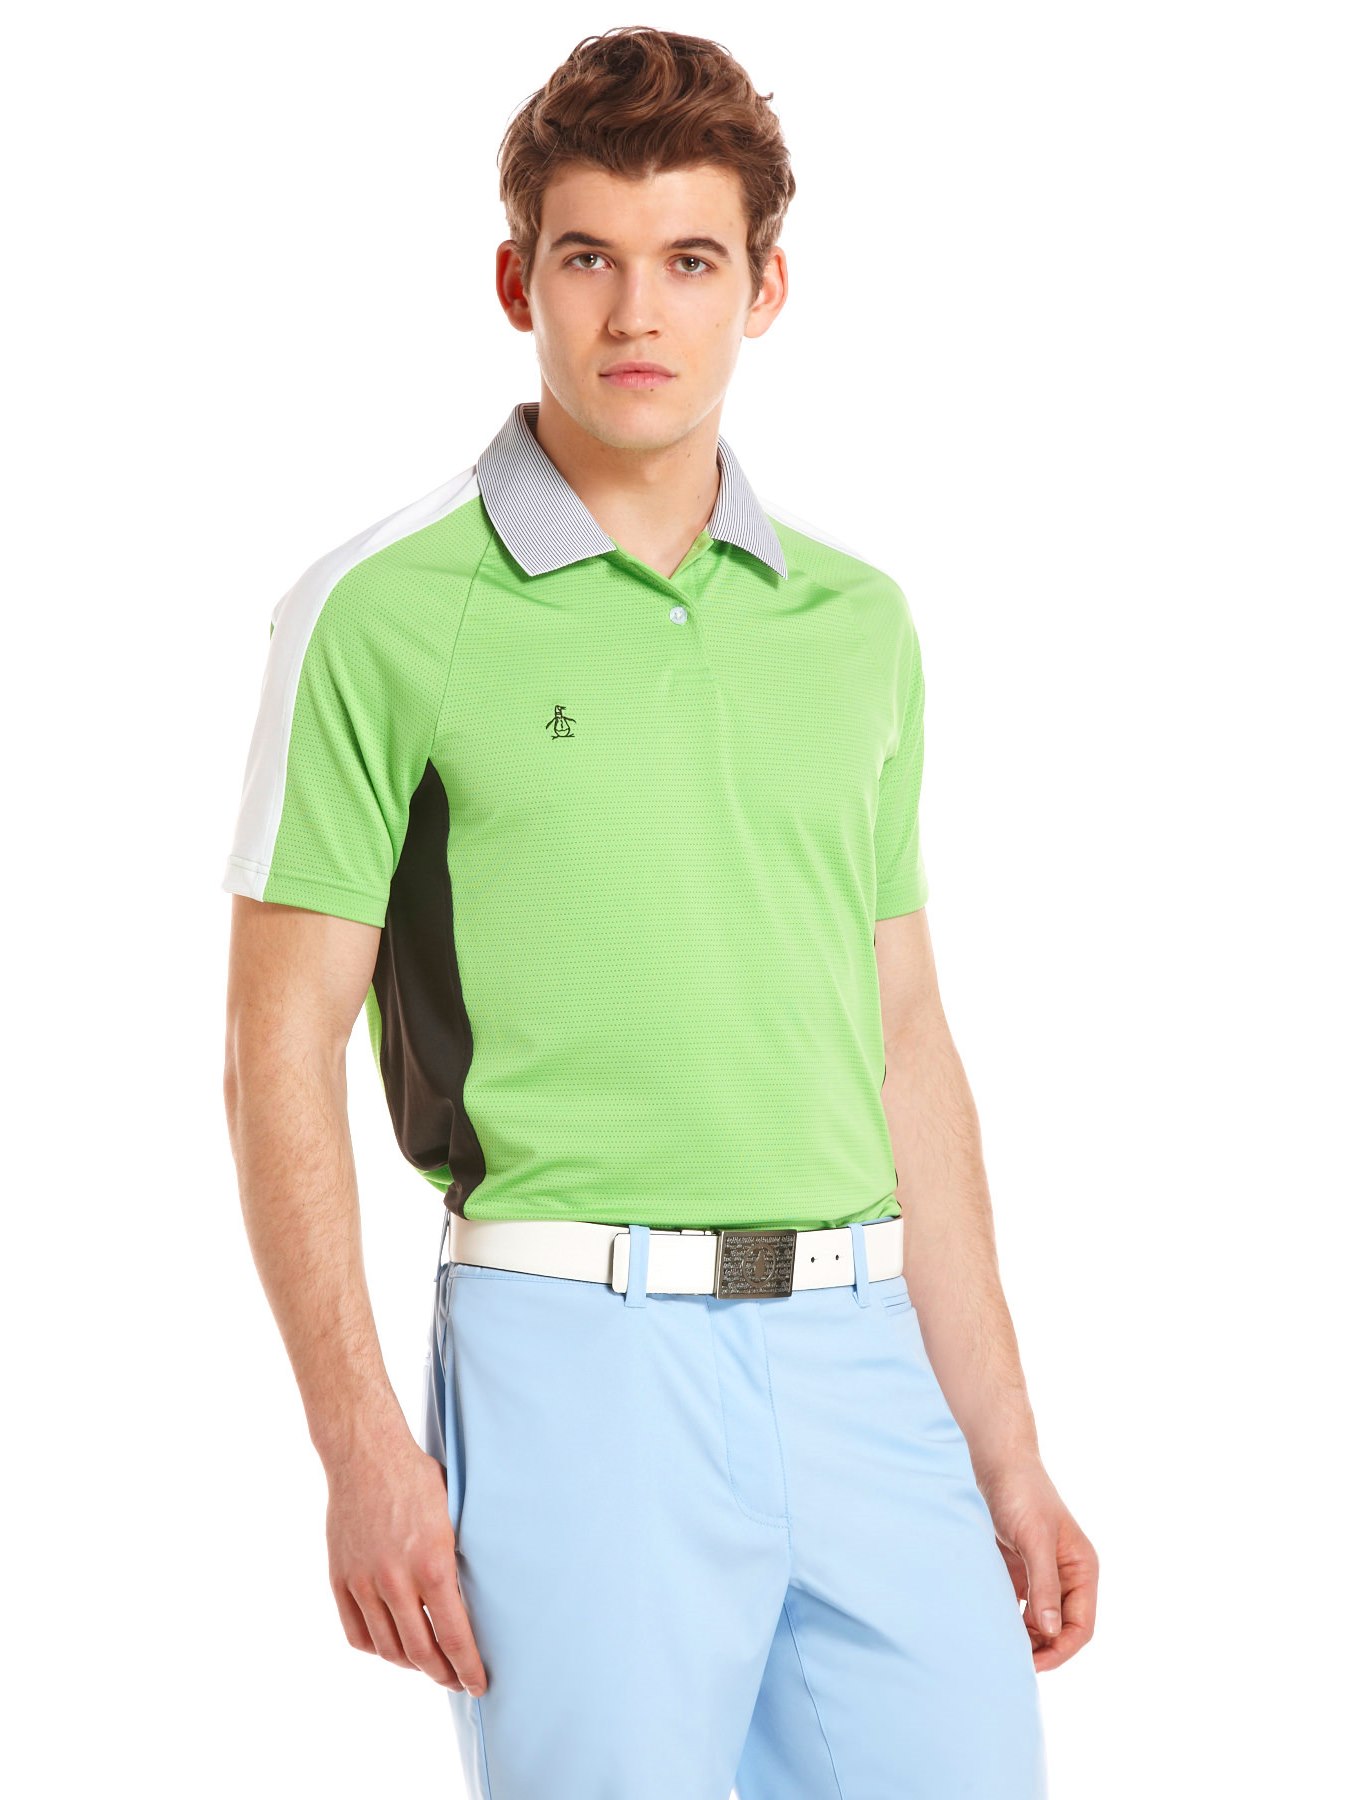 vintage golf clothes for young men - Clothing Design IdeasClothing ...